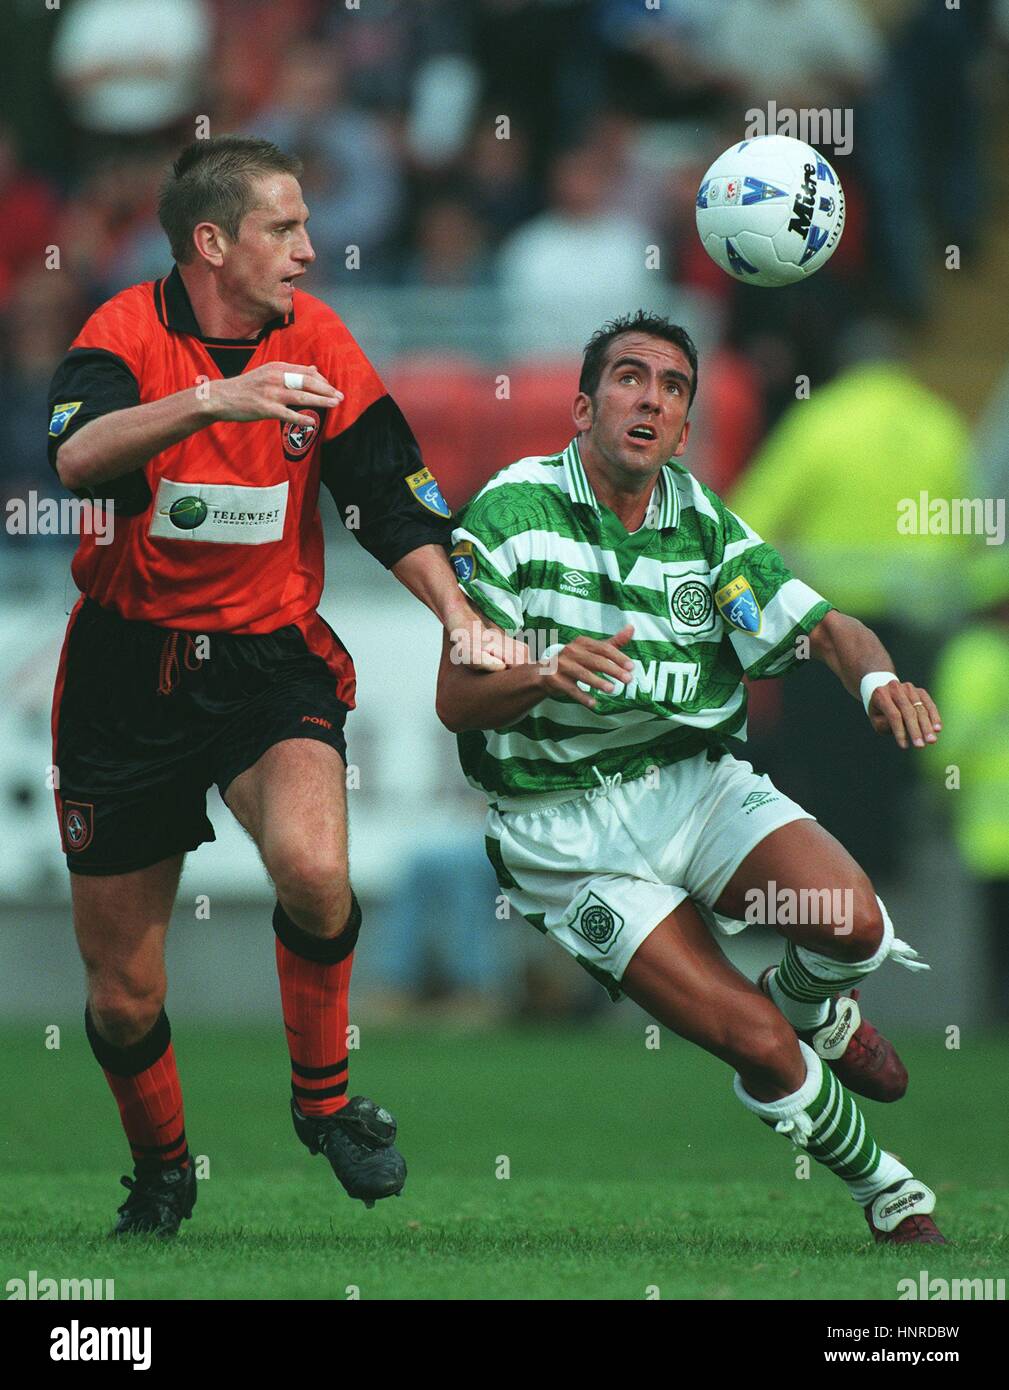 MARK PERRY & PAOLO DI CANIO DUNDEE UNITED V CELTIC FC 15 September 1996 Stock Photo